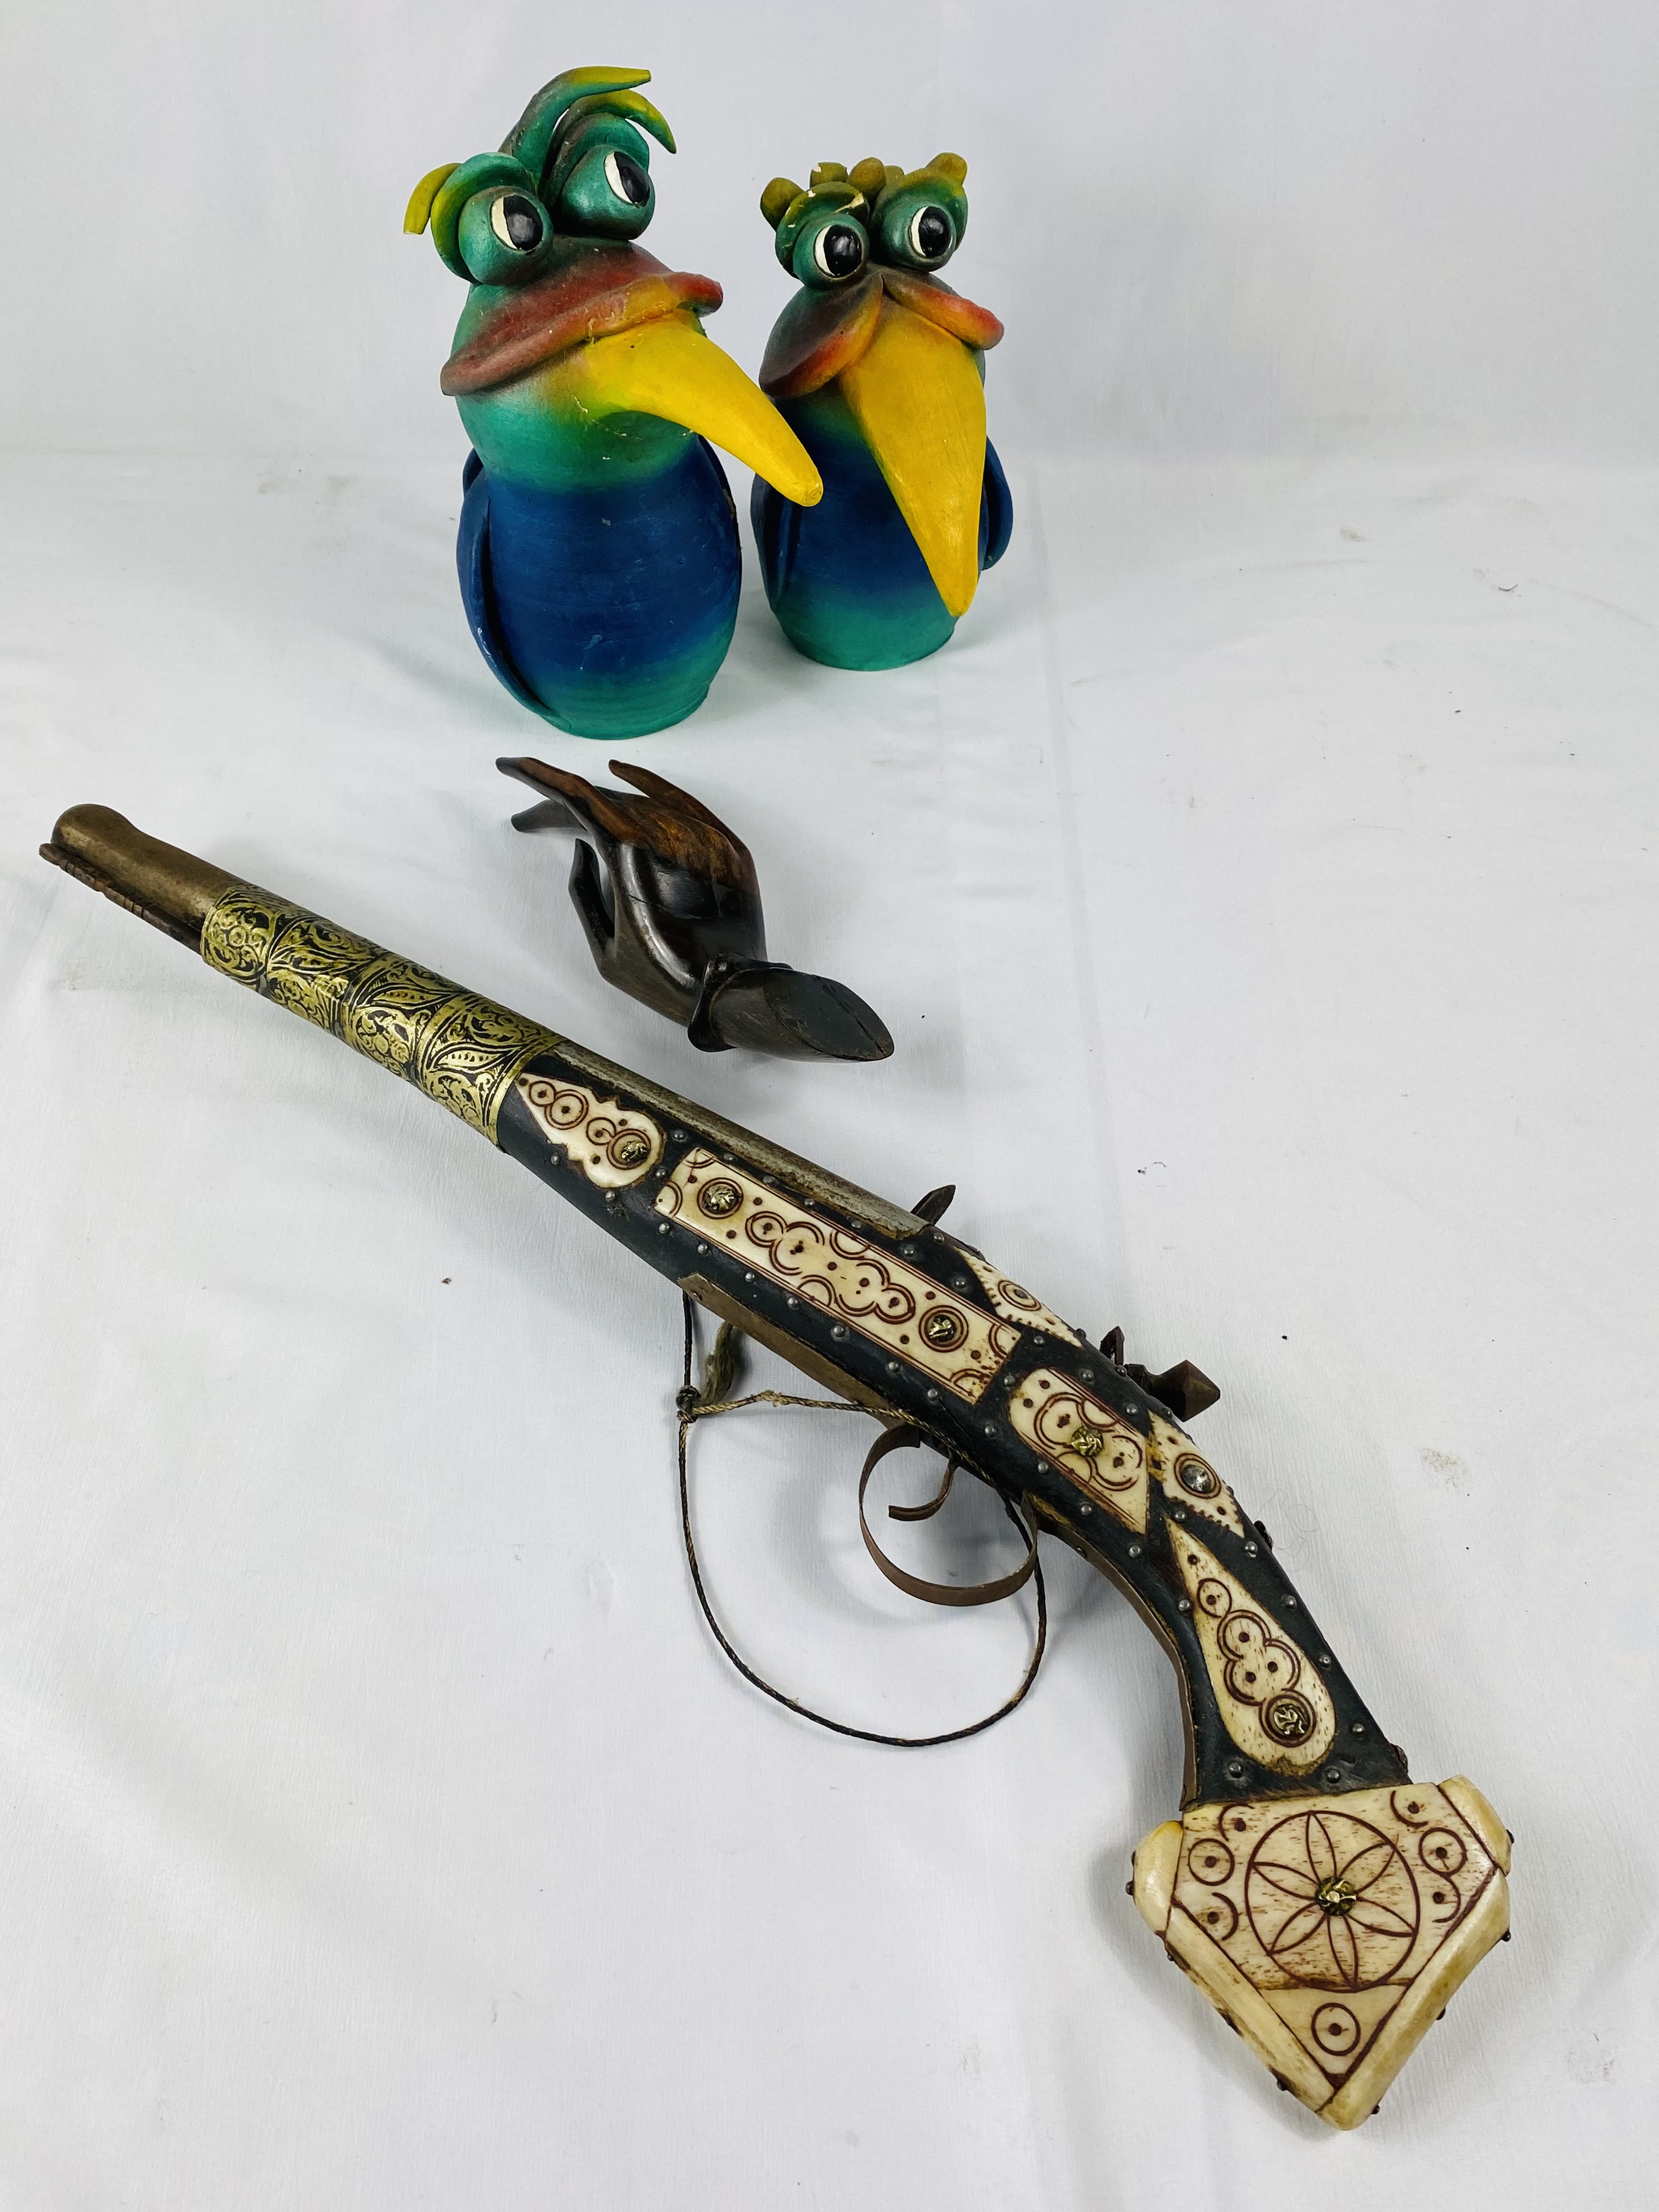 Middle Eastern decorative wood pistol and other items - Image 3 of 3